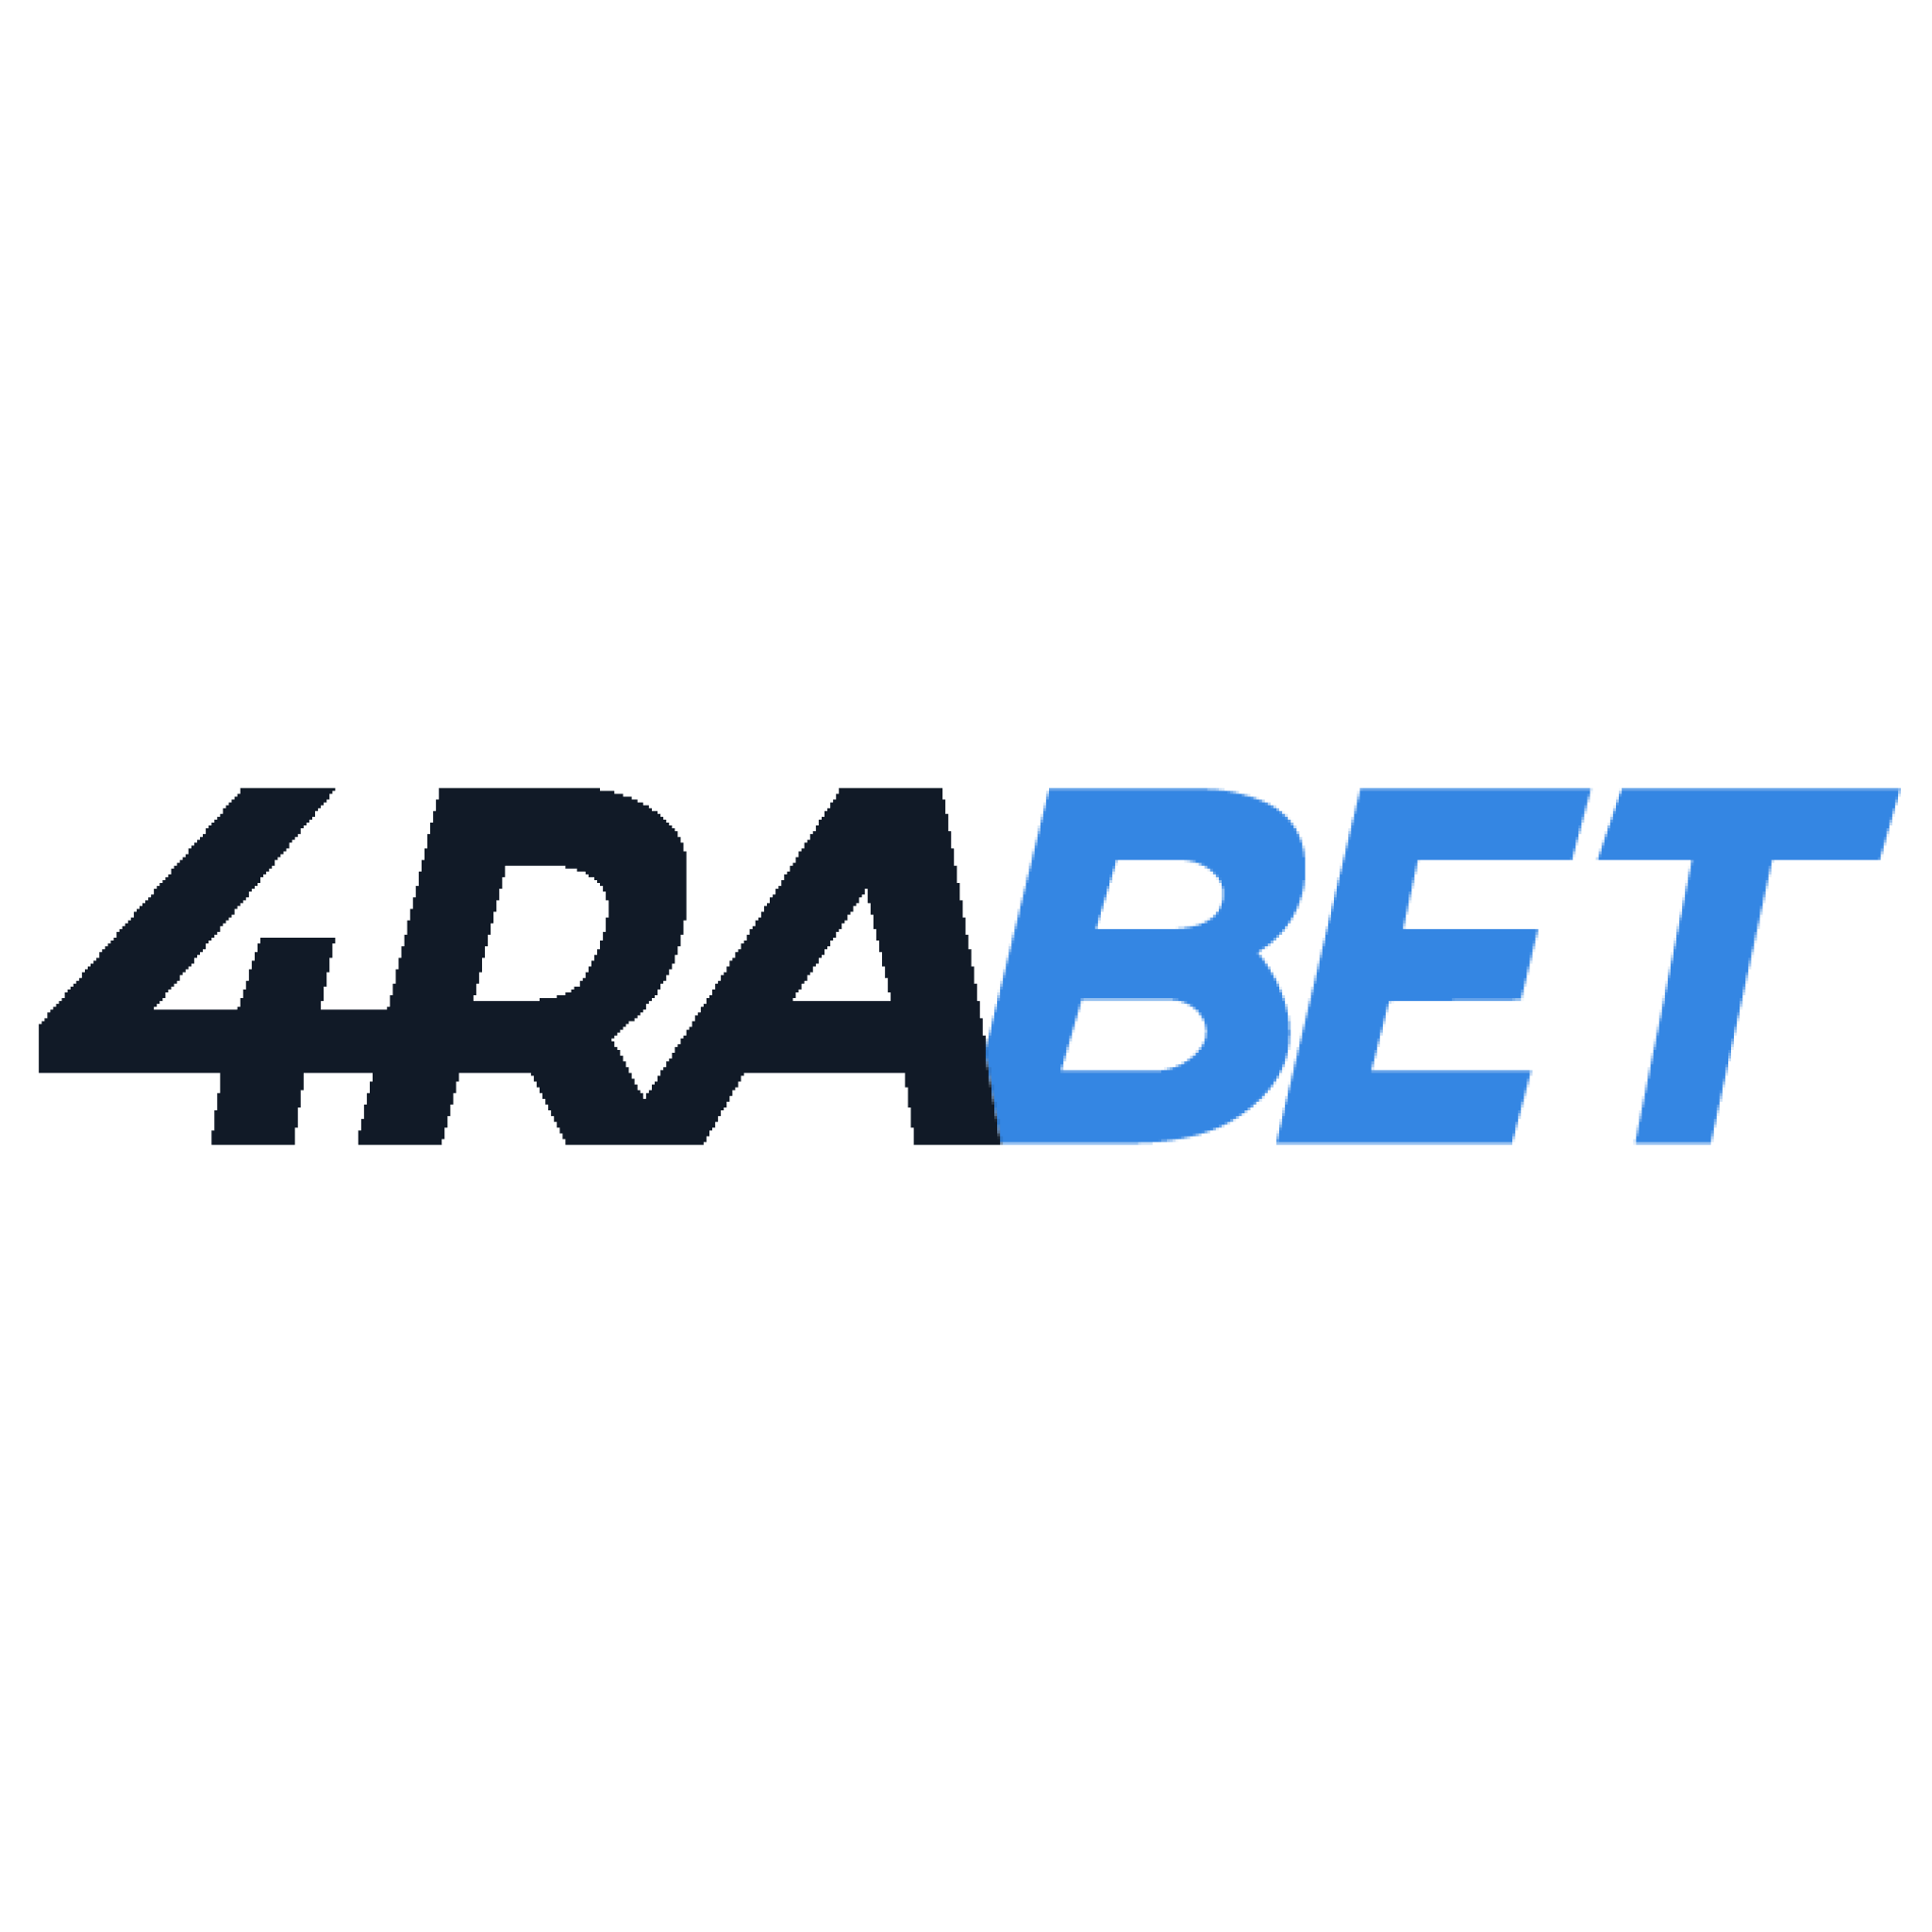 Start betting on cricket online with 4rabet!